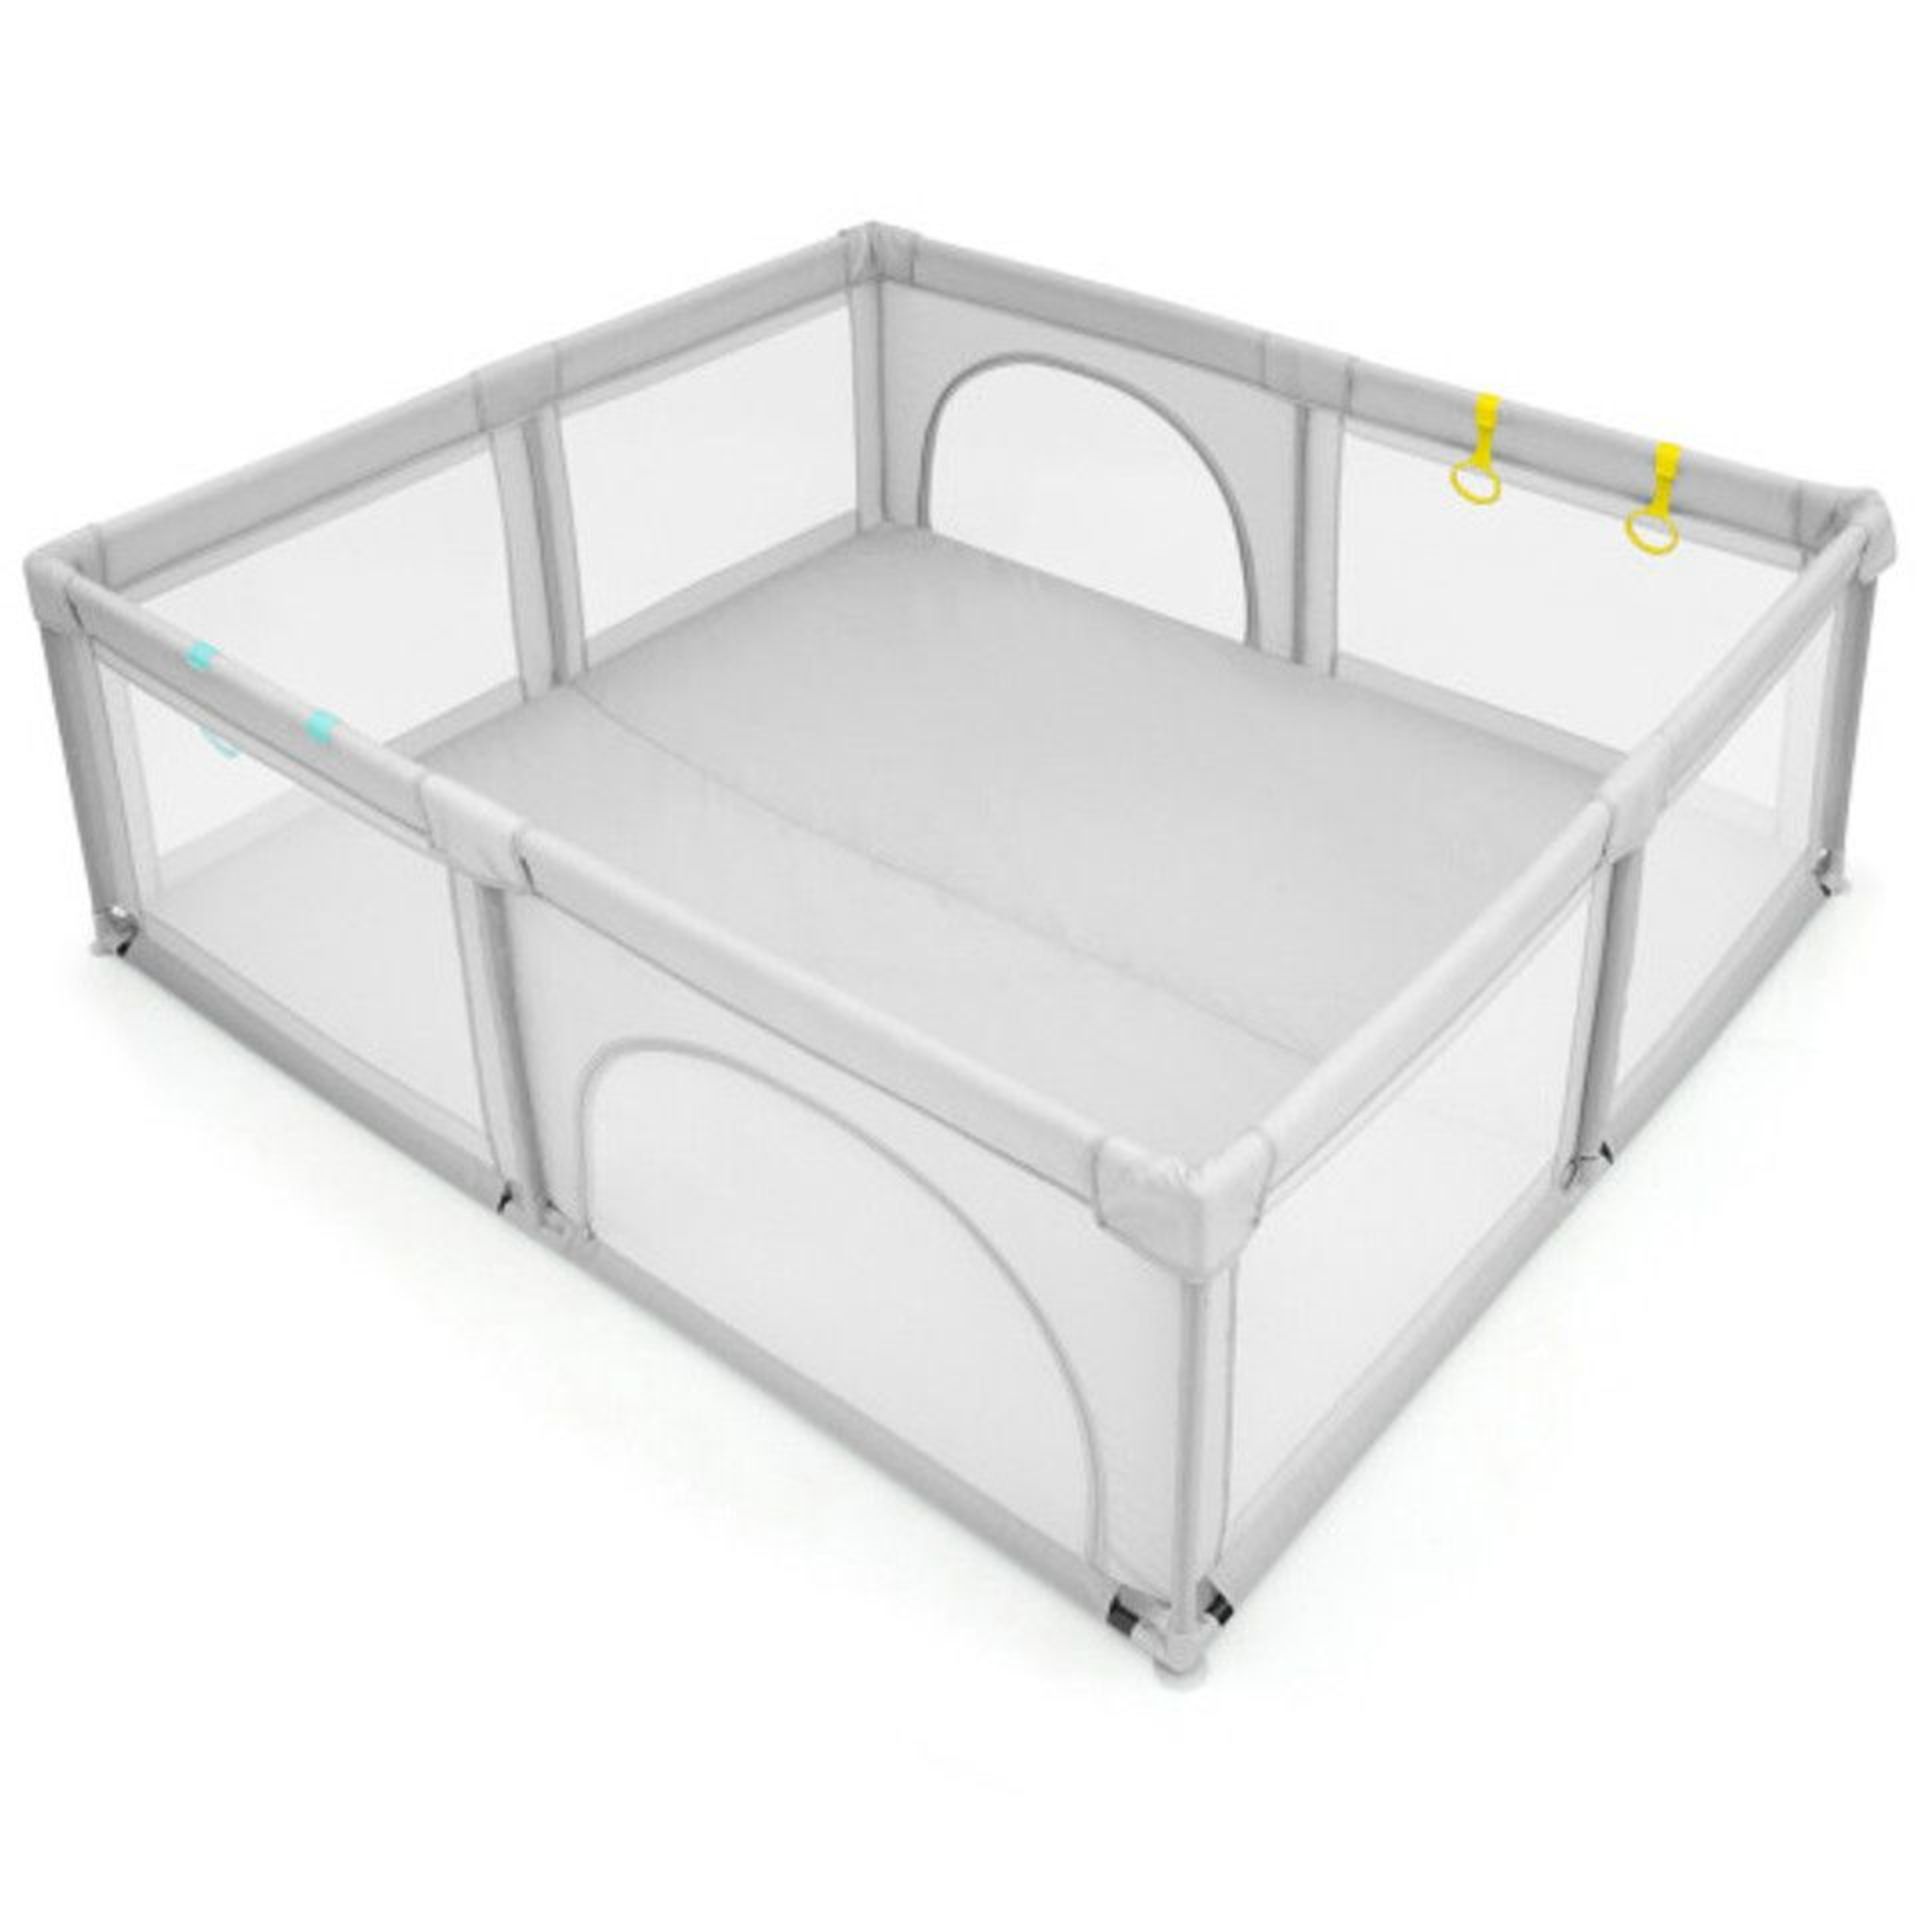 UY10025GR Large Infant Baby Playpen Safety Play Center Yard With 50 Ocean Balls-Gray. - ER53.